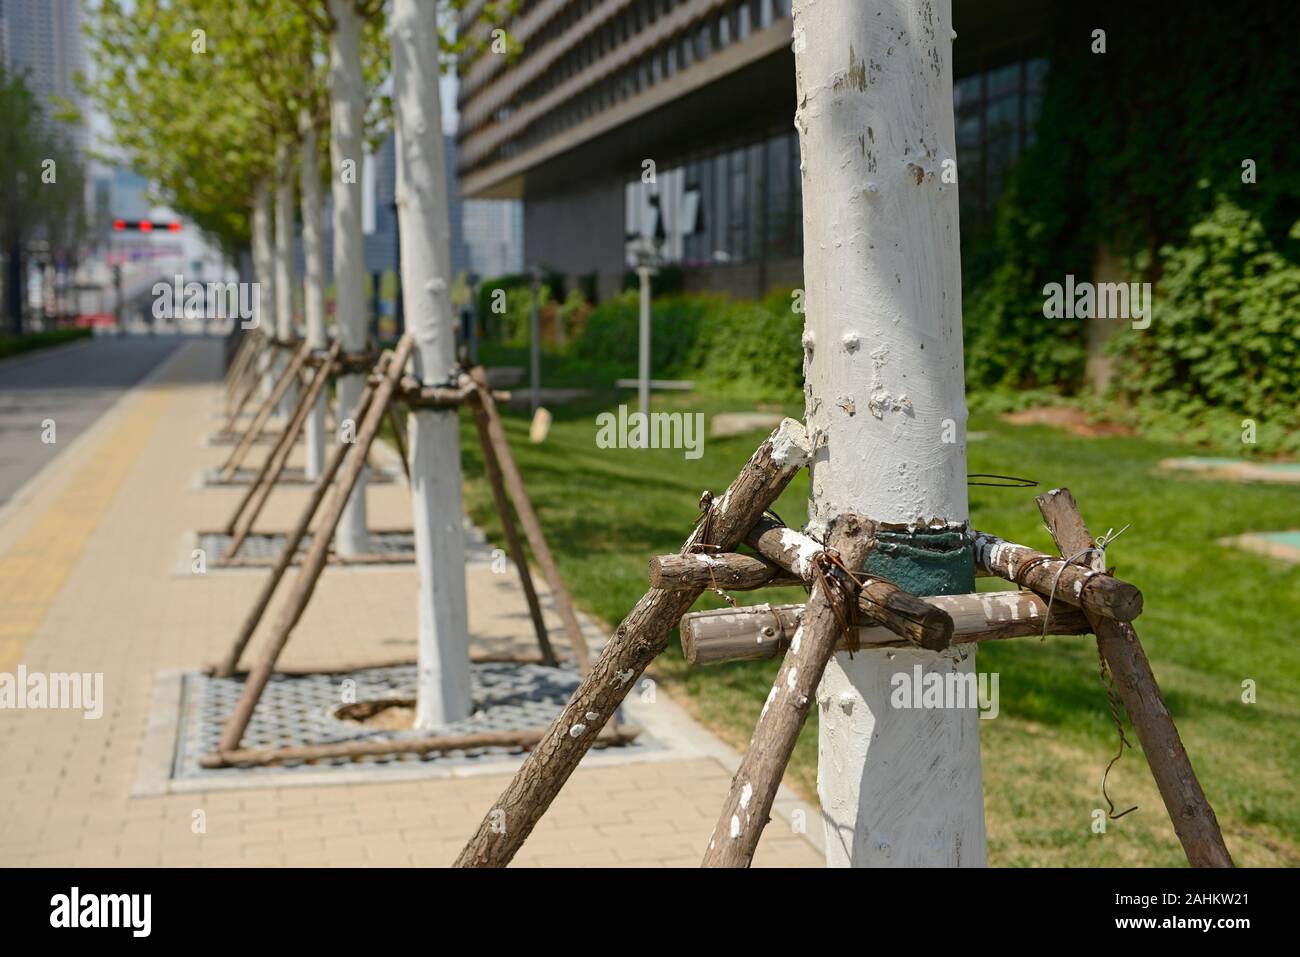 Newly staked trees line a path outside Binhai free trade zone headquarters office in Binhai district, Tianjin, China Stock Photo